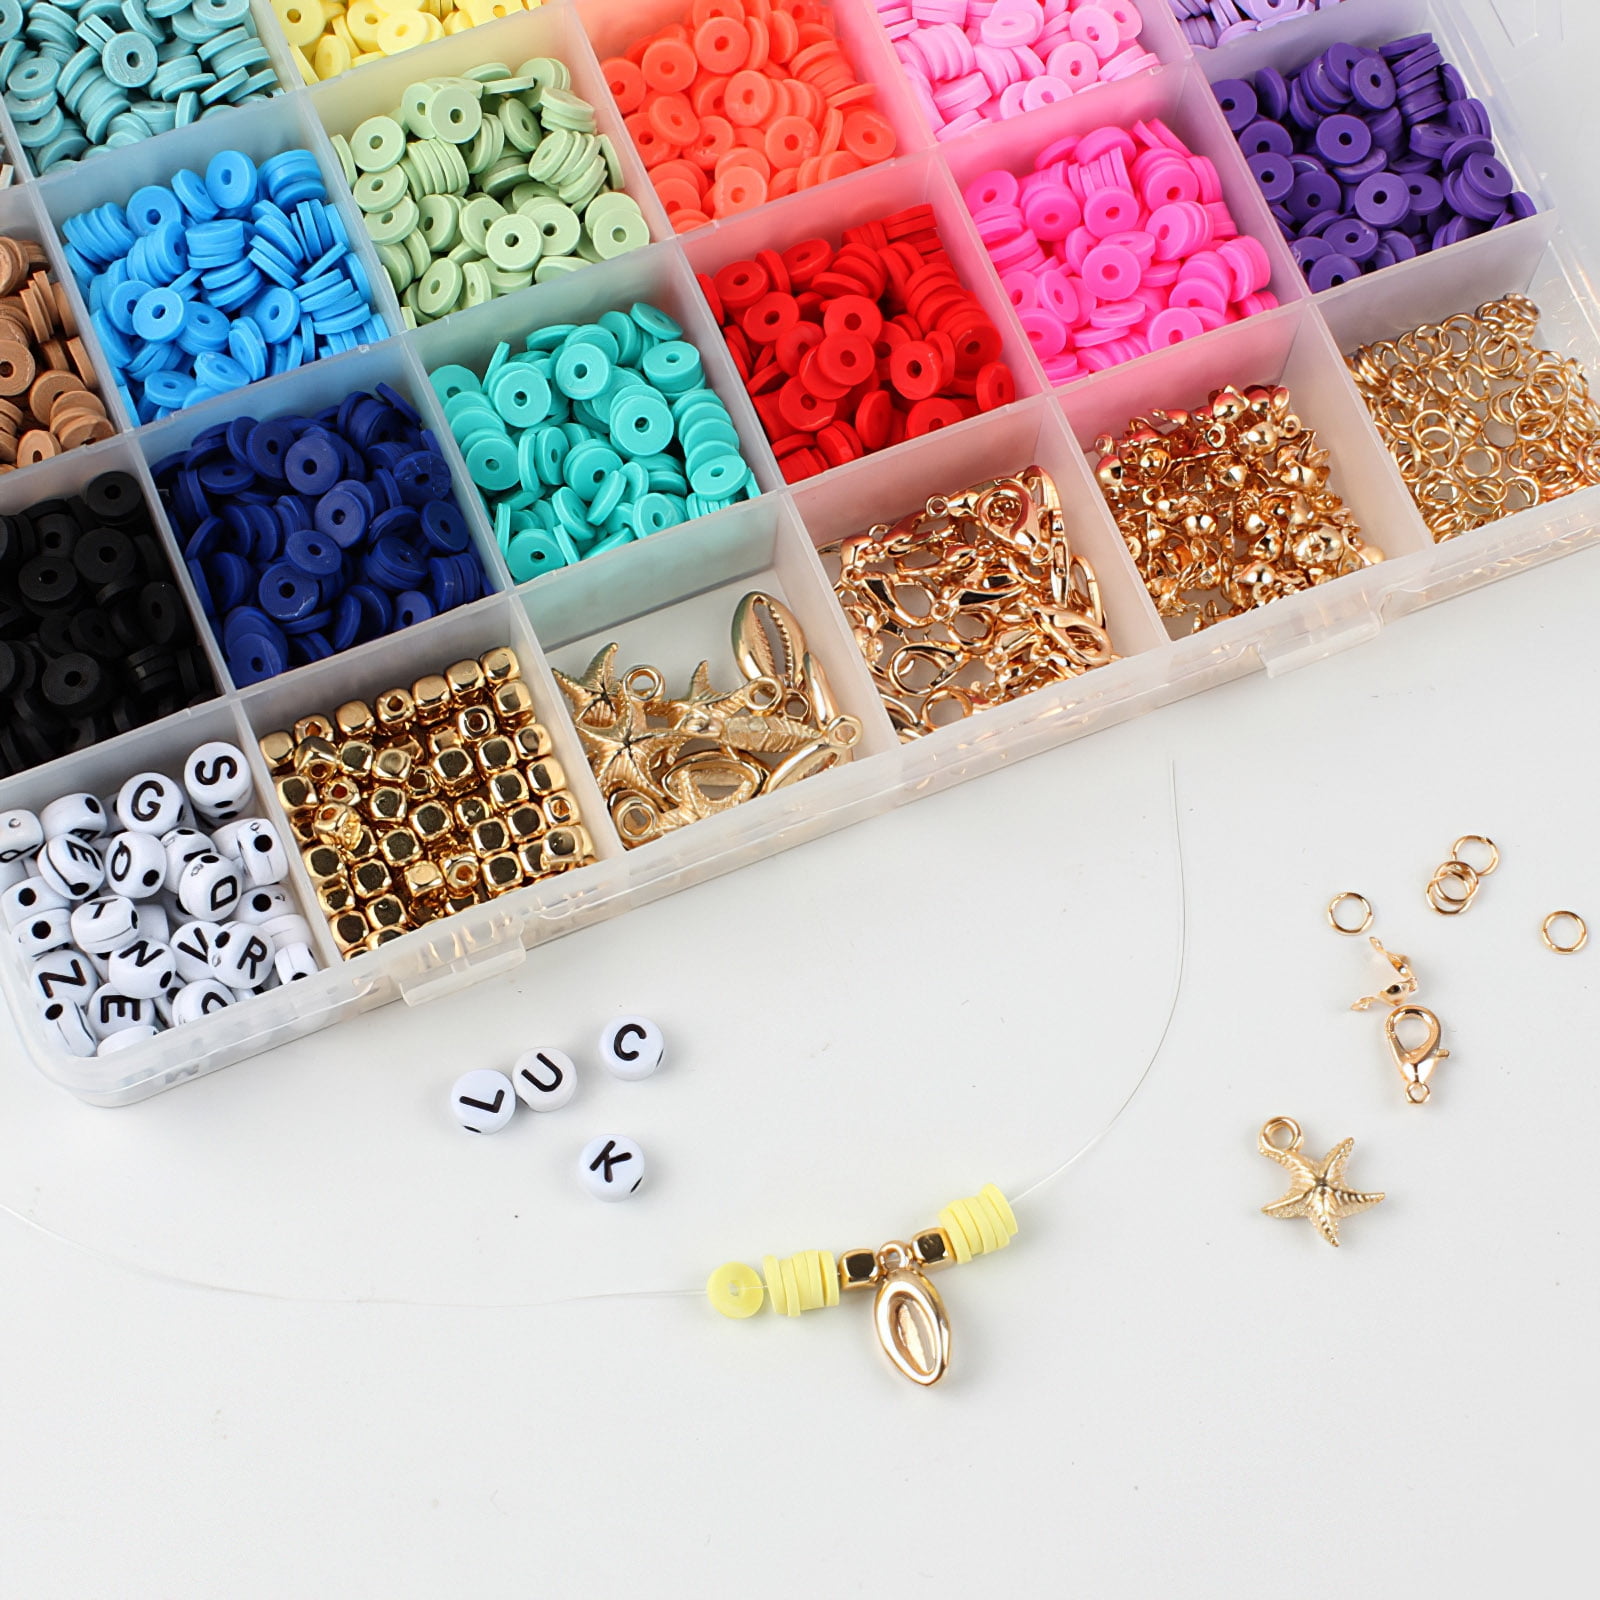 12 Strands Clay Beads for Jewelry Making Caffox 4560pcs 6mm Flat